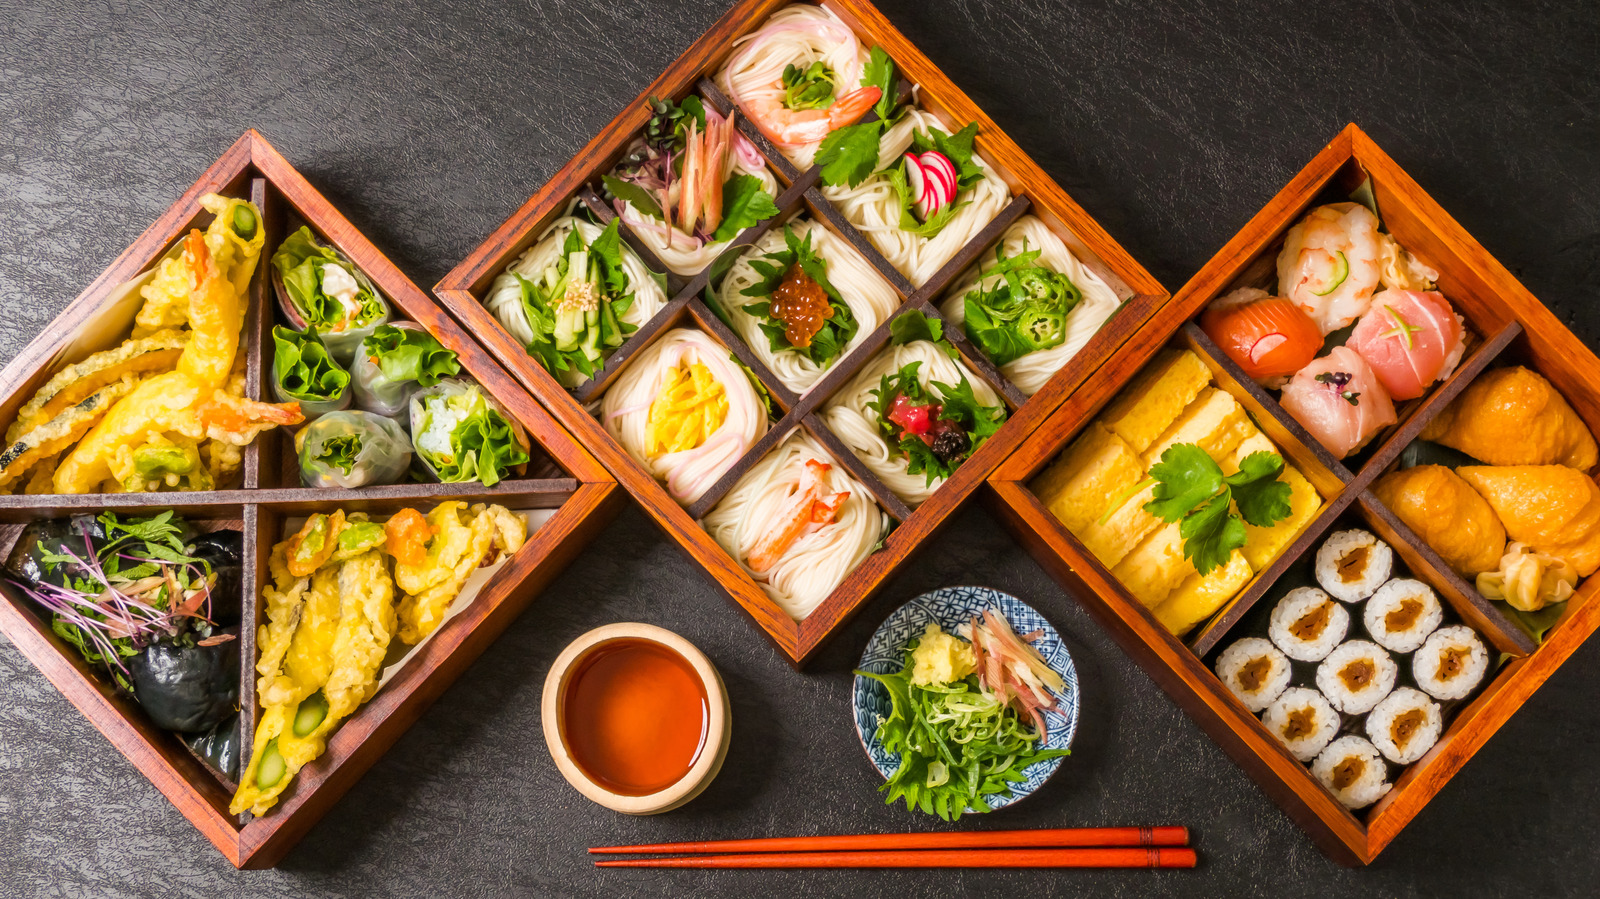 https://www.tastingtable.com/img/gallery/20-japanese-dishes-you-need-to-try-at-least-once/l-intro-1664219638.jpg